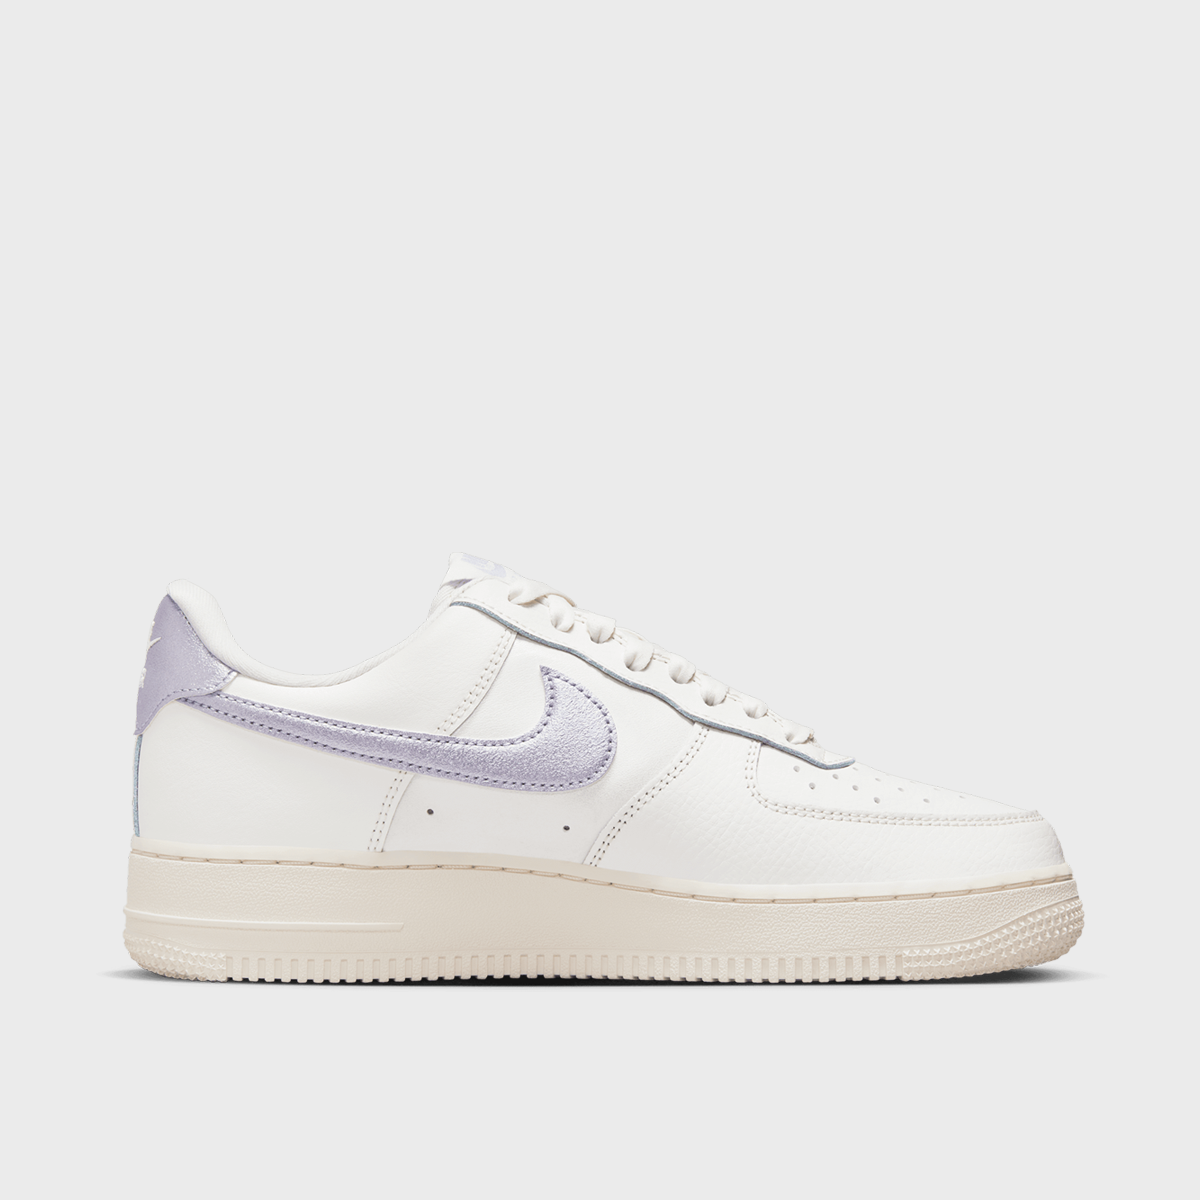 WMNS Air Force 1 '07